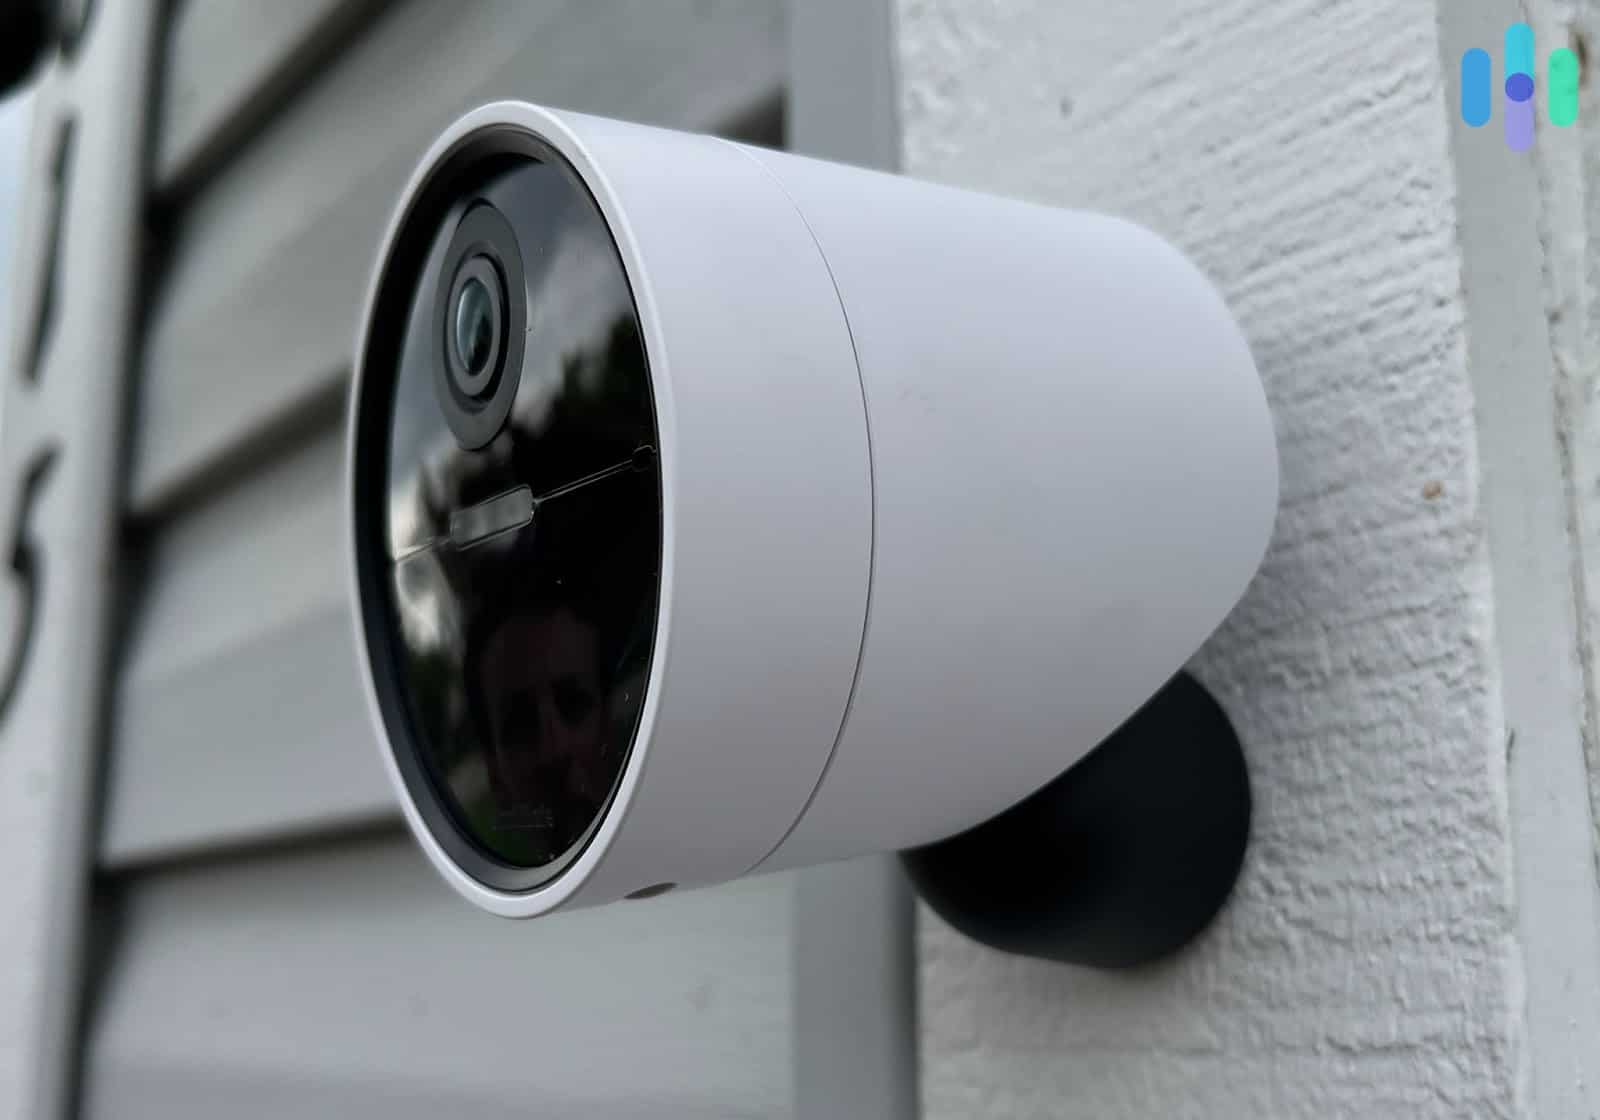 What Is Deter On Security Cameras?